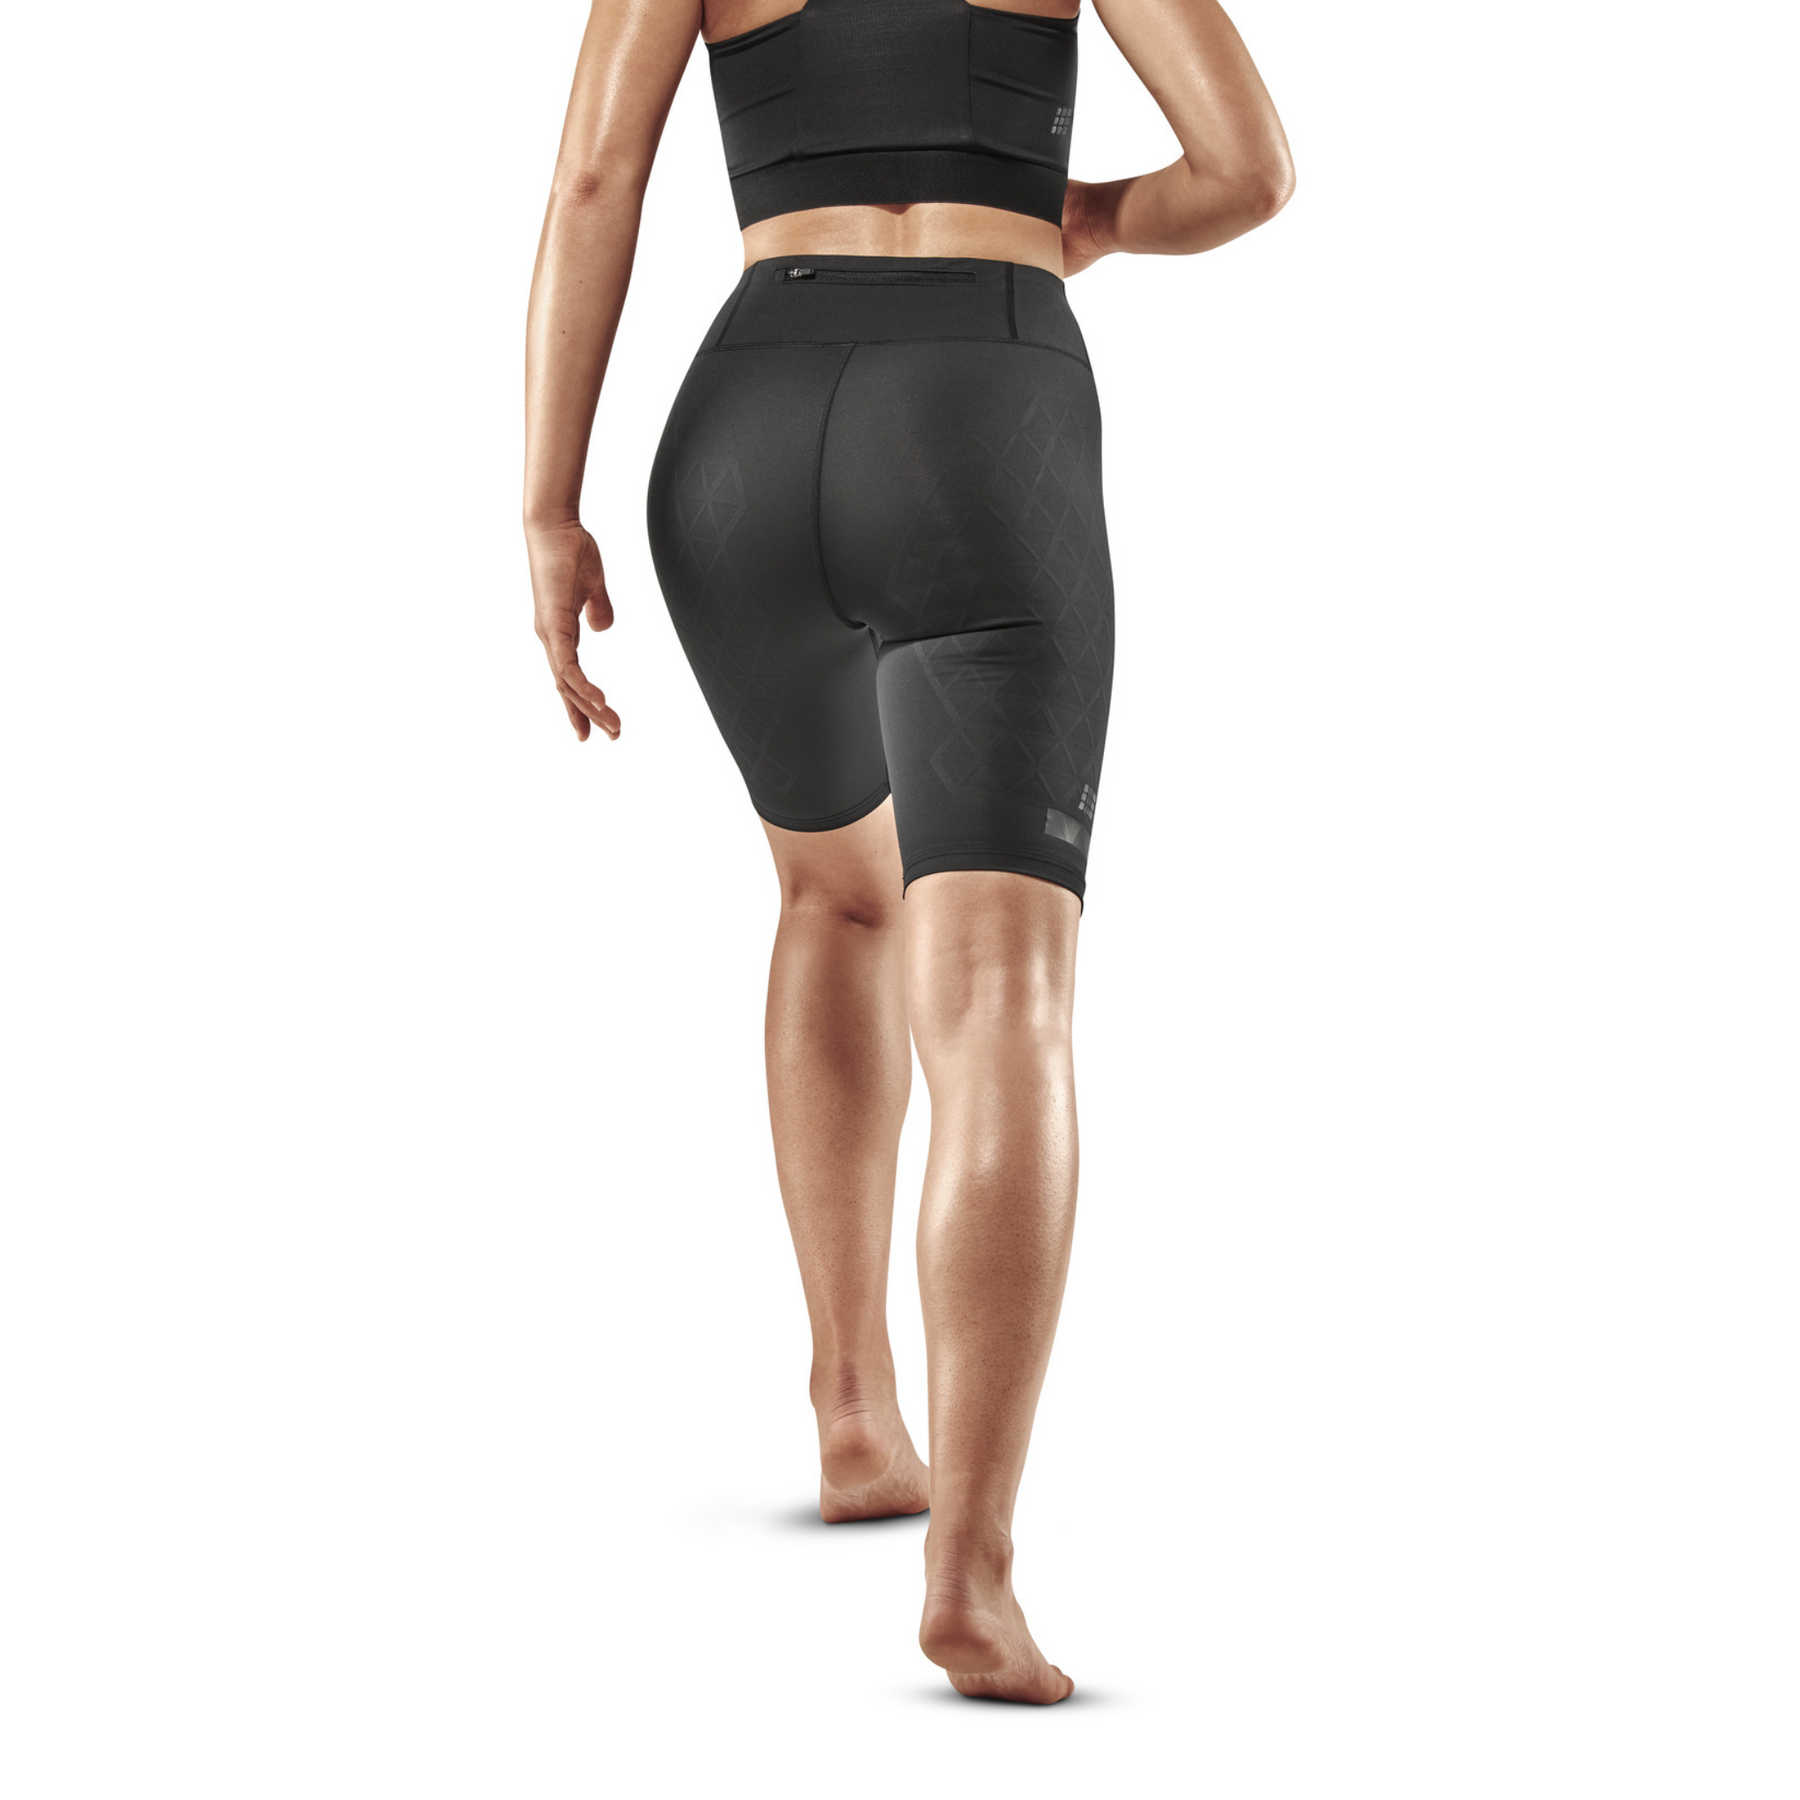 Run Support Shorts for Women  CEP Activating Compression